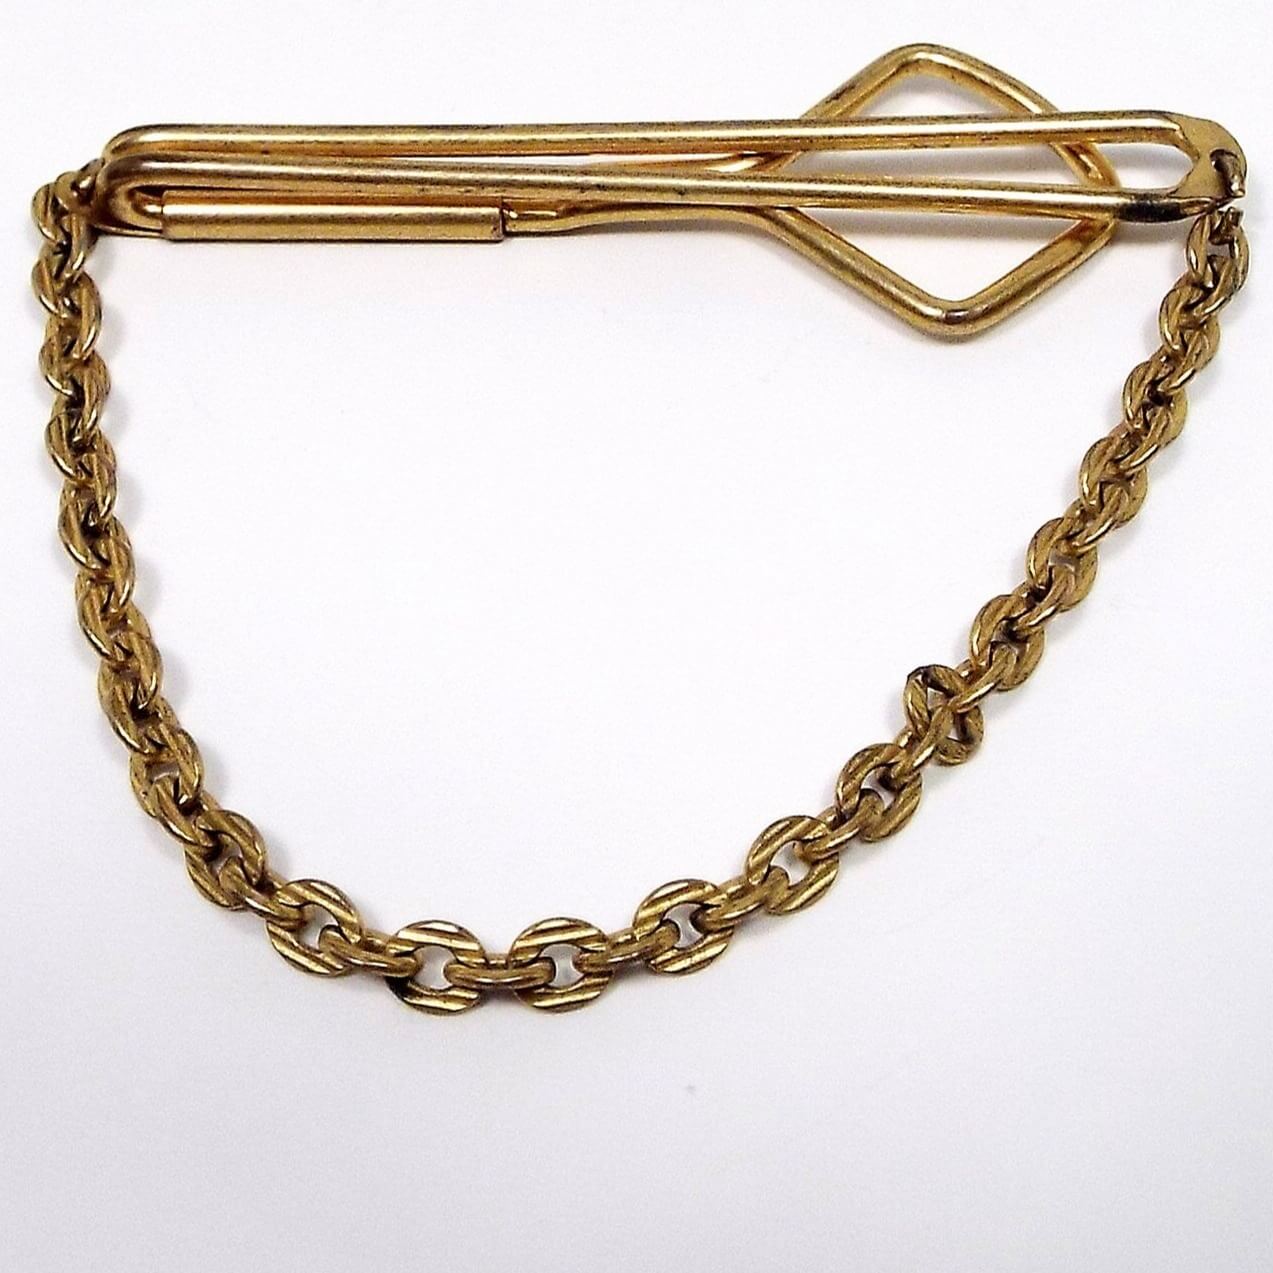 Front view of the 1930's Art Deco vintage Swank tie chain bar. The metal is gold tone in color. There is an open wire style bar that is long and thinner in the front and has a wider angled open area in the back. Rolo chain hangs down from either side of the bar. The links have a textured line pattern on them.